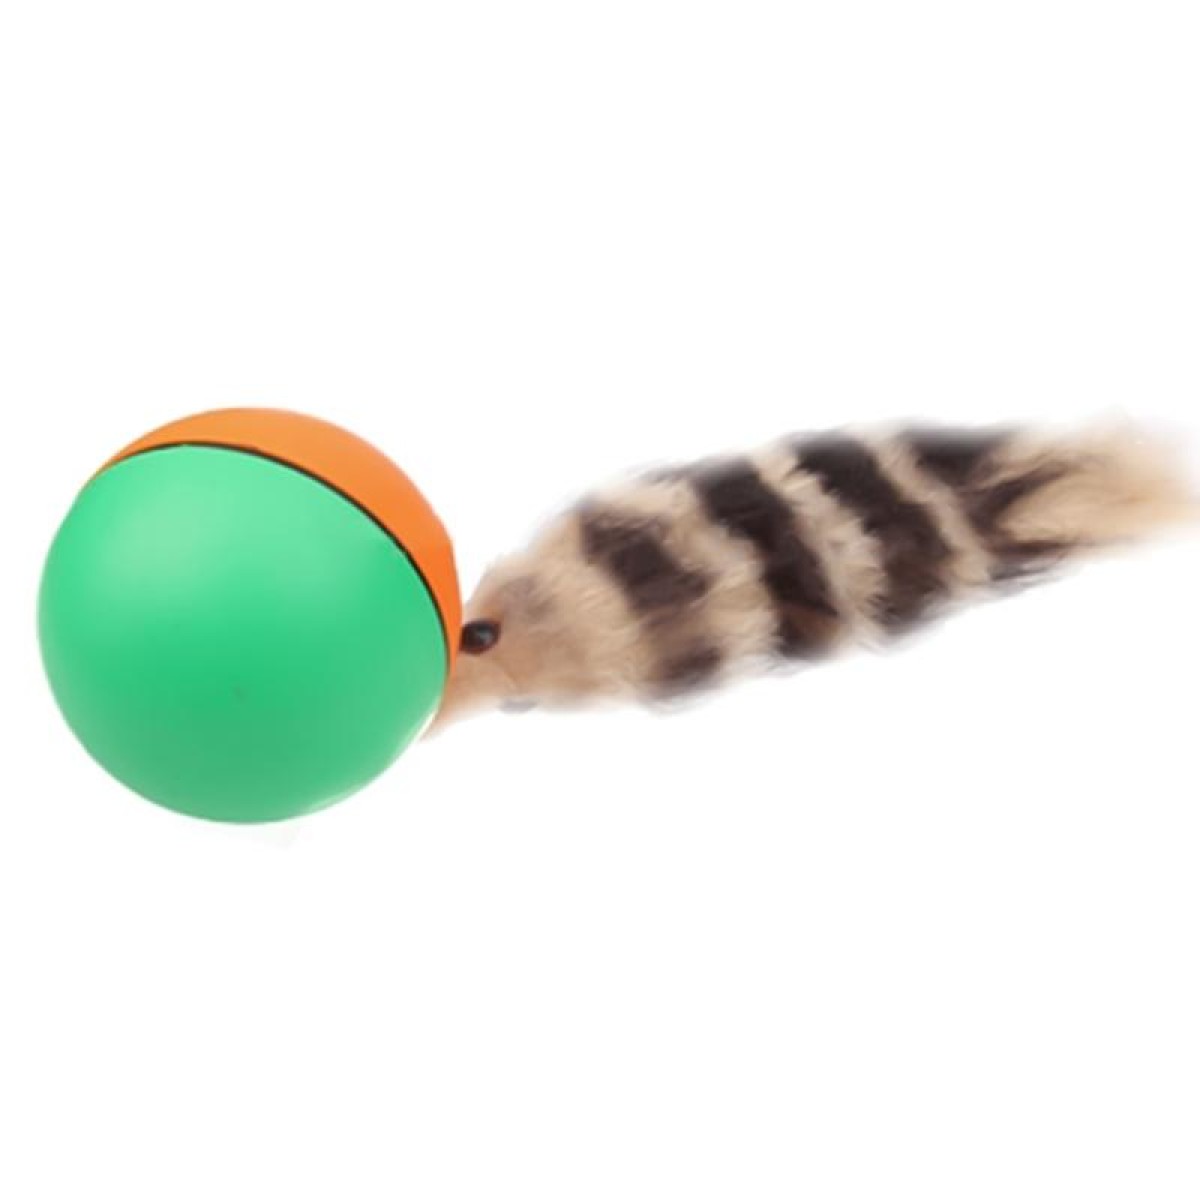 Small Motorized Rolling Chaser Ball Toy for Dog / Cat / Pet / Kid, Random Color Delivery